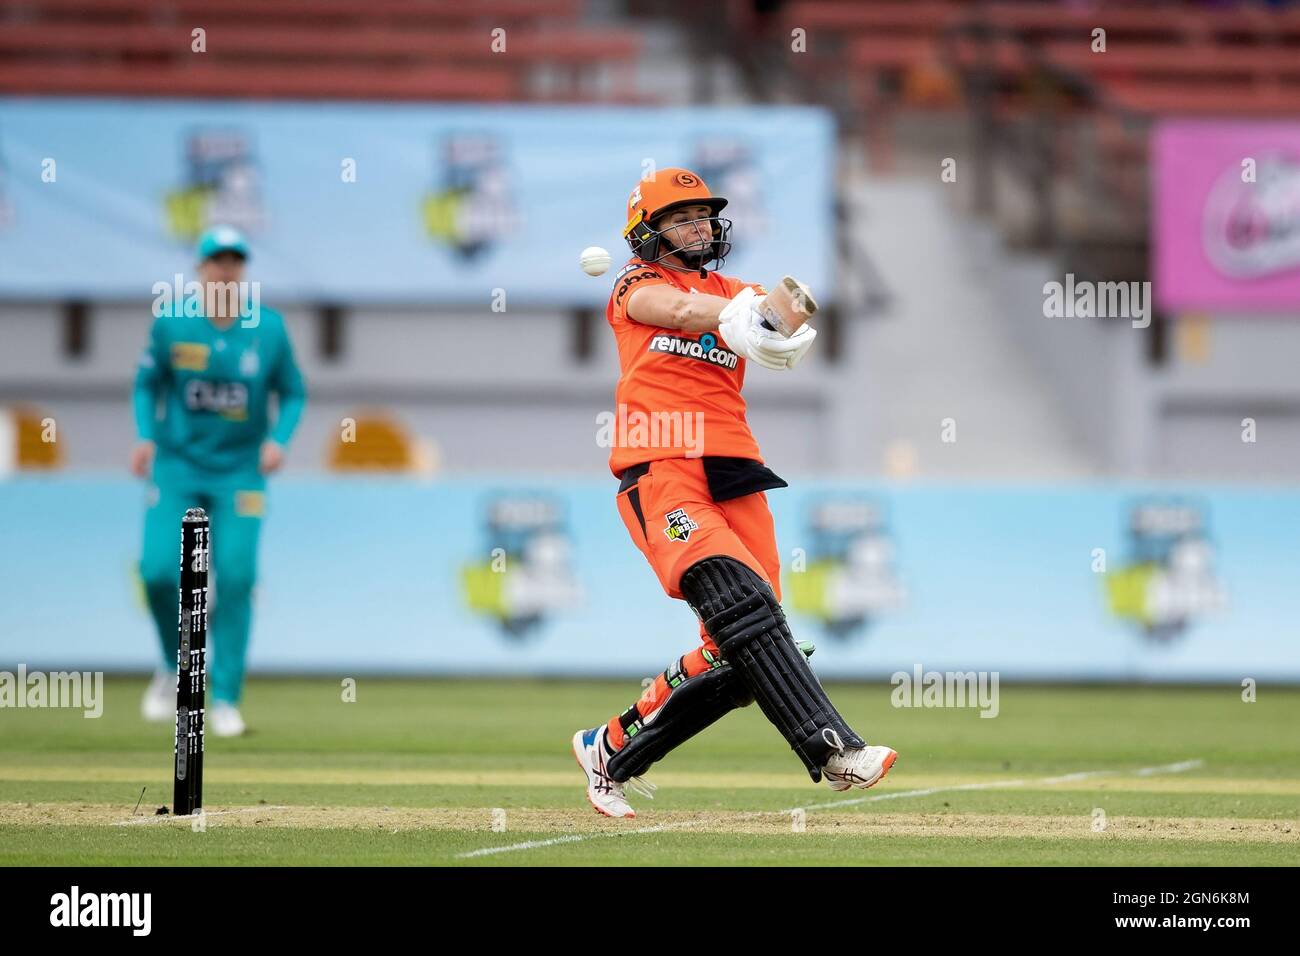 Amy Jones of the Perth Scorchers plays a shot during the week 1 Womens Big Bash